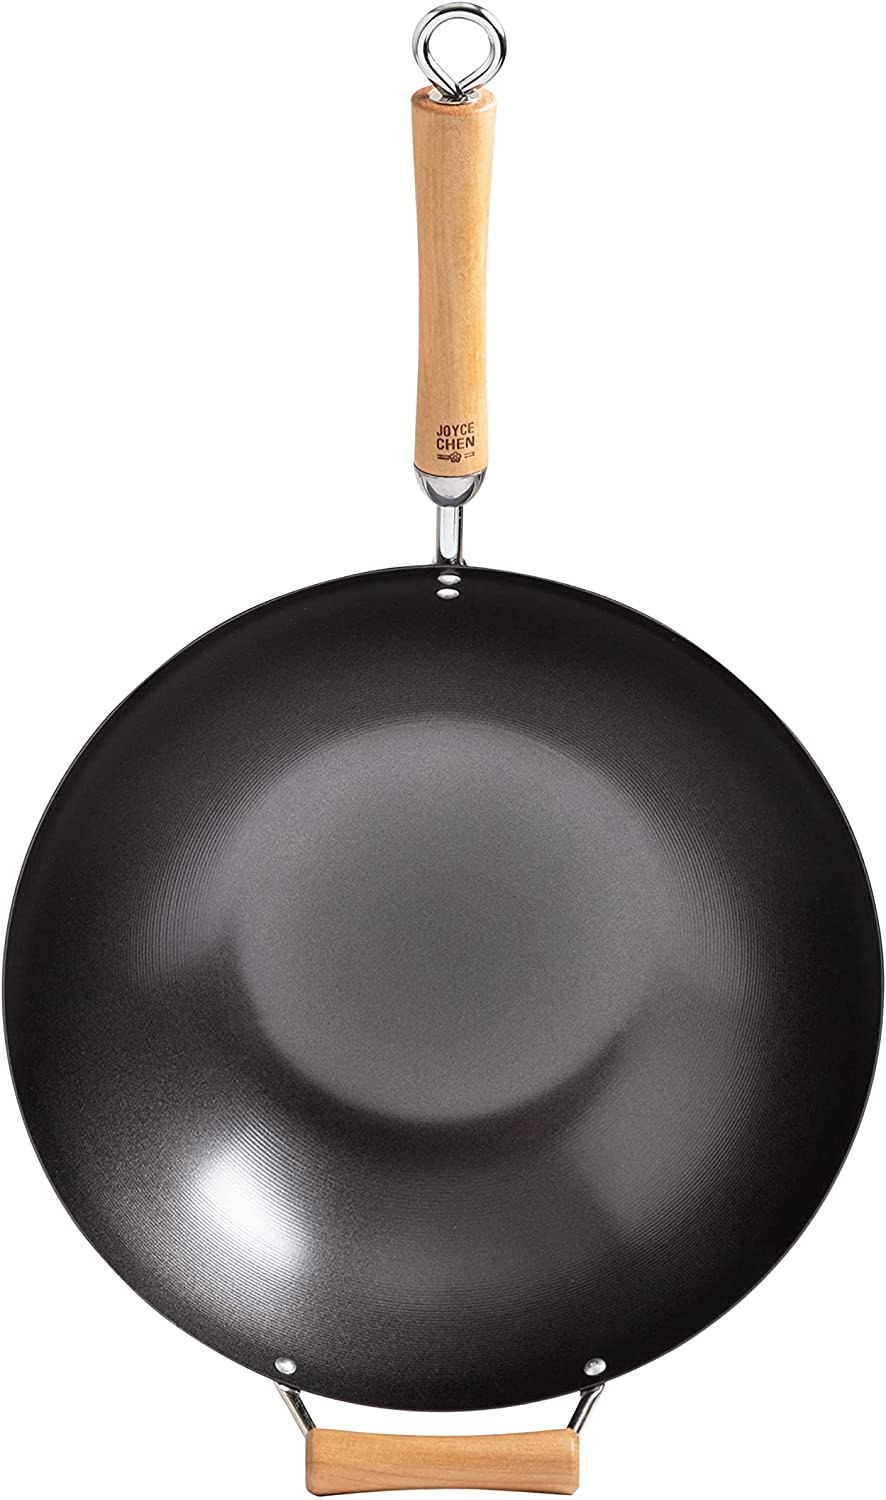 Techef - Art Pan Collection/Fry Pan, Coated 5 Times with Teflon Select Non-Stick